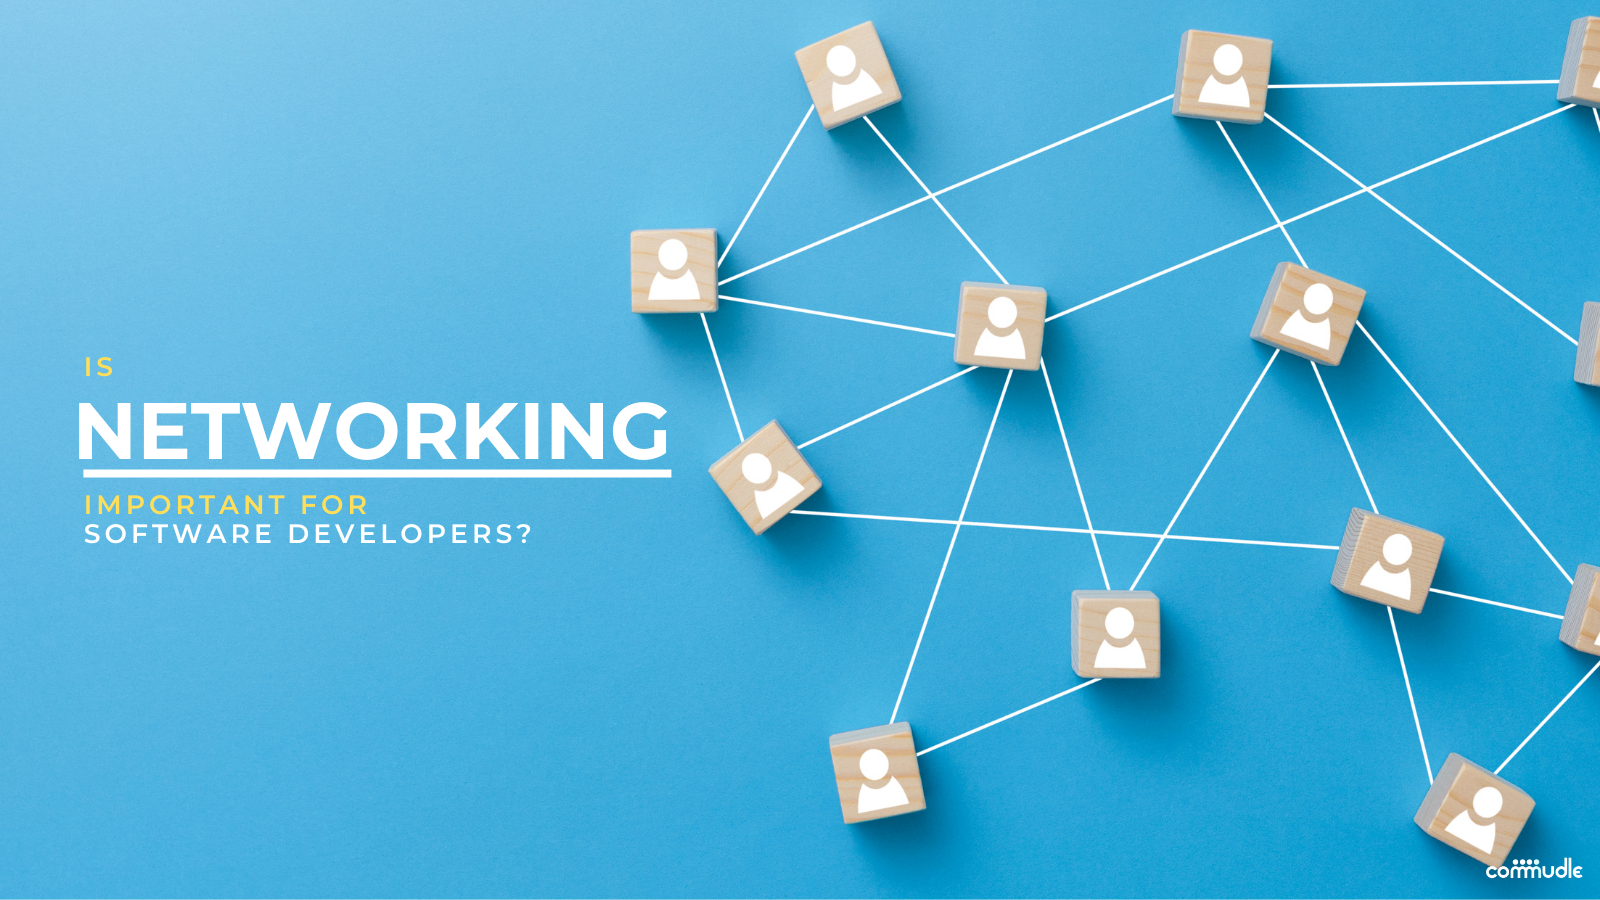 Is Networking Important for Software Developers? - Commudle